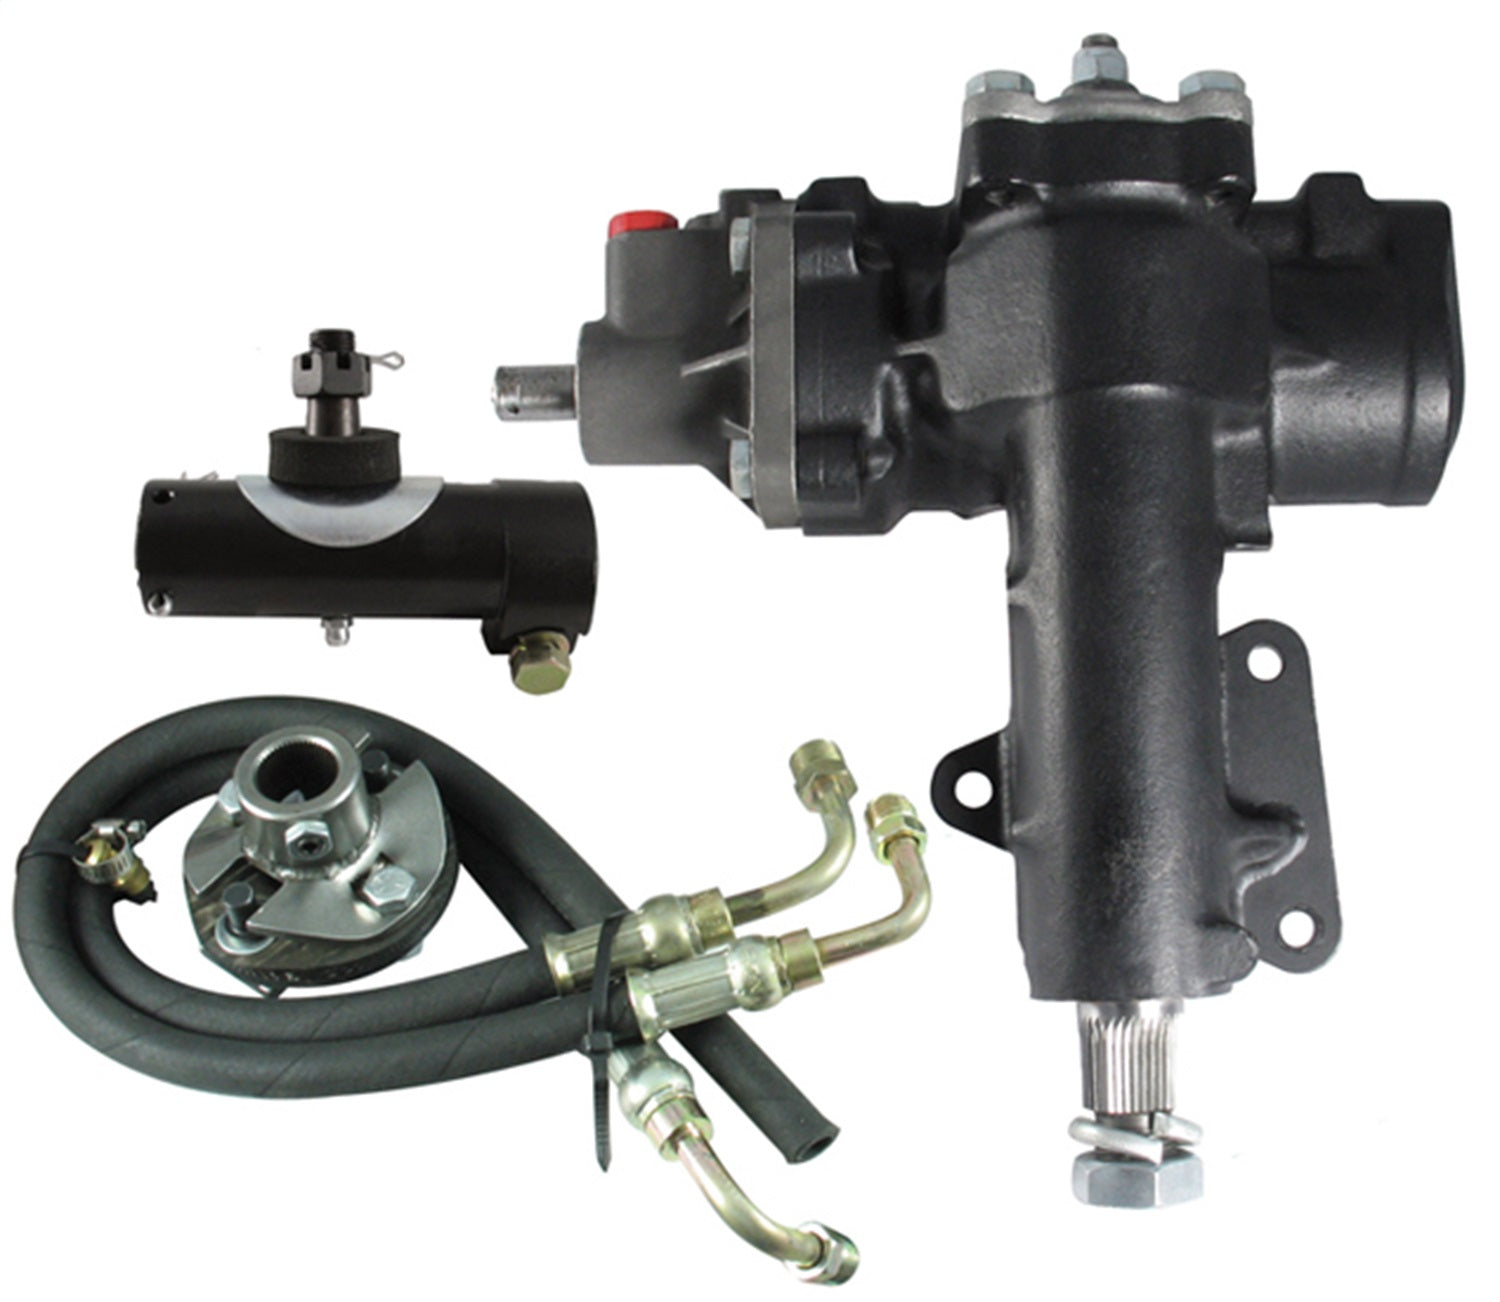 Borgeson Power Steering Conversion Kit. 63-66 Corvette with factory P/S 12.7:1 ratio. 999031